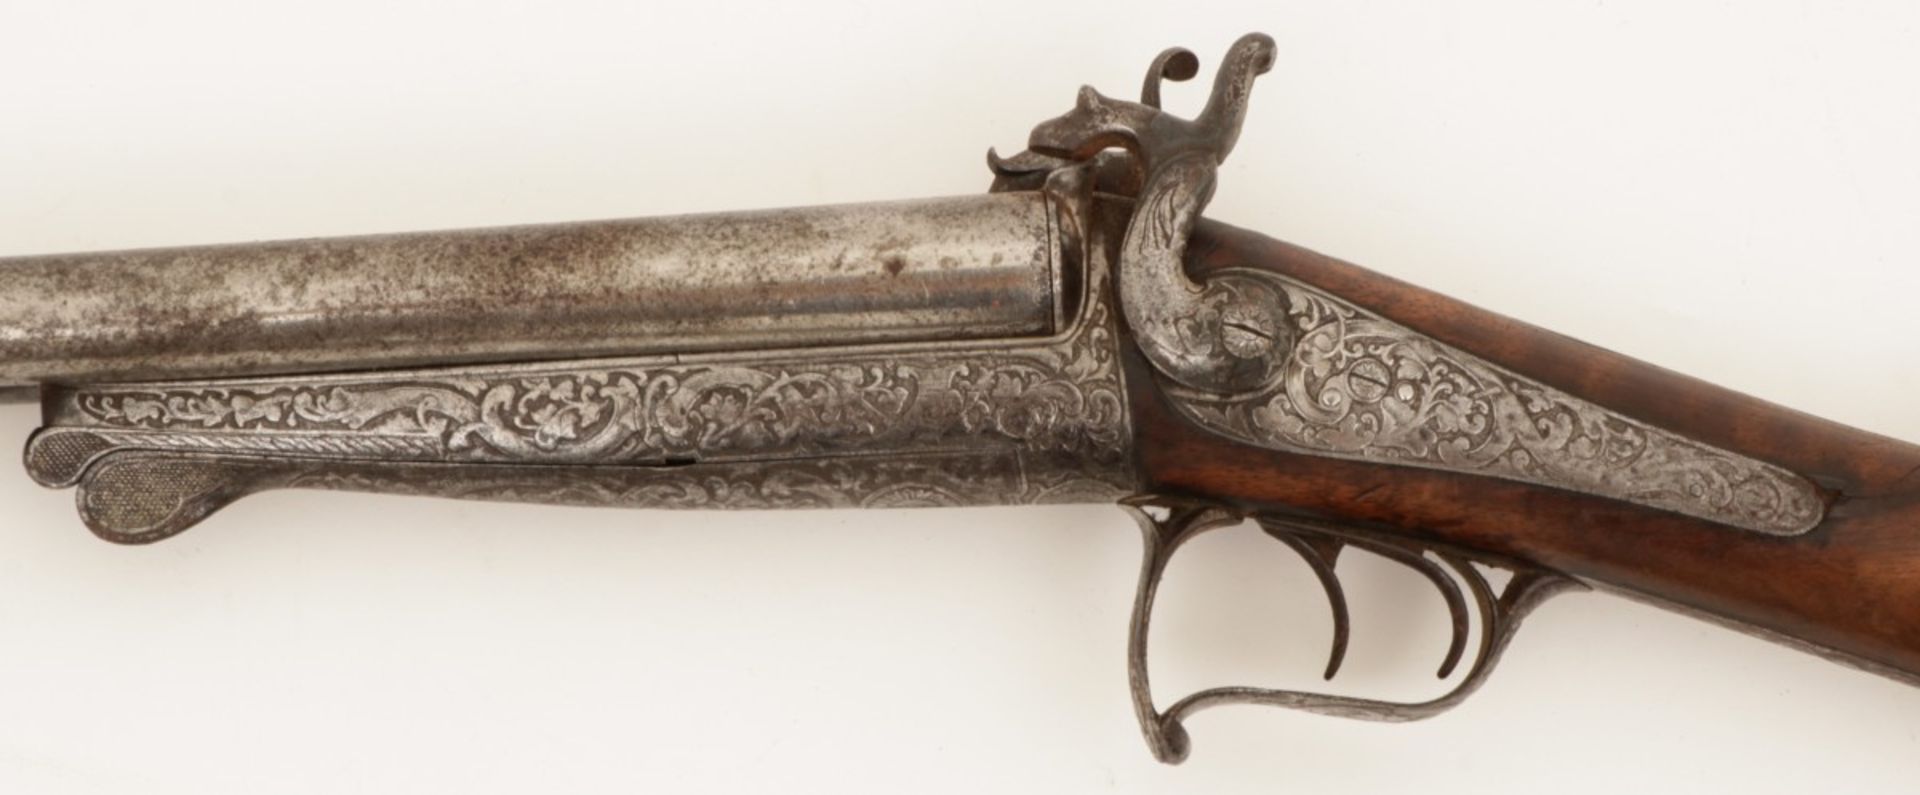 A double barrel percussion hunting rifle, poss. France, 19th century. - Image 2 of 2